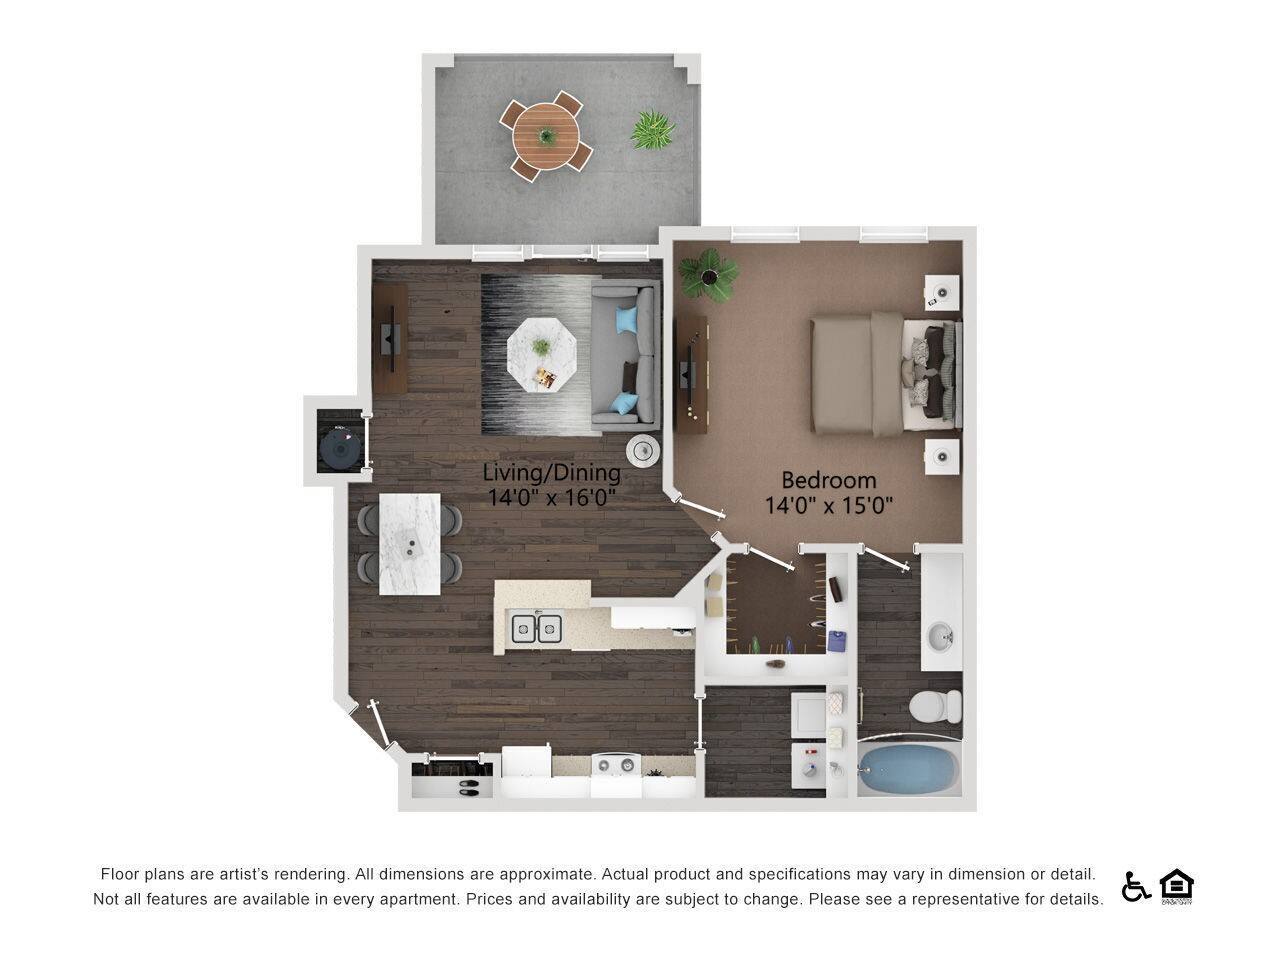 Floorplan diagram for The Dominion (Renovated), showing 1 bedroom